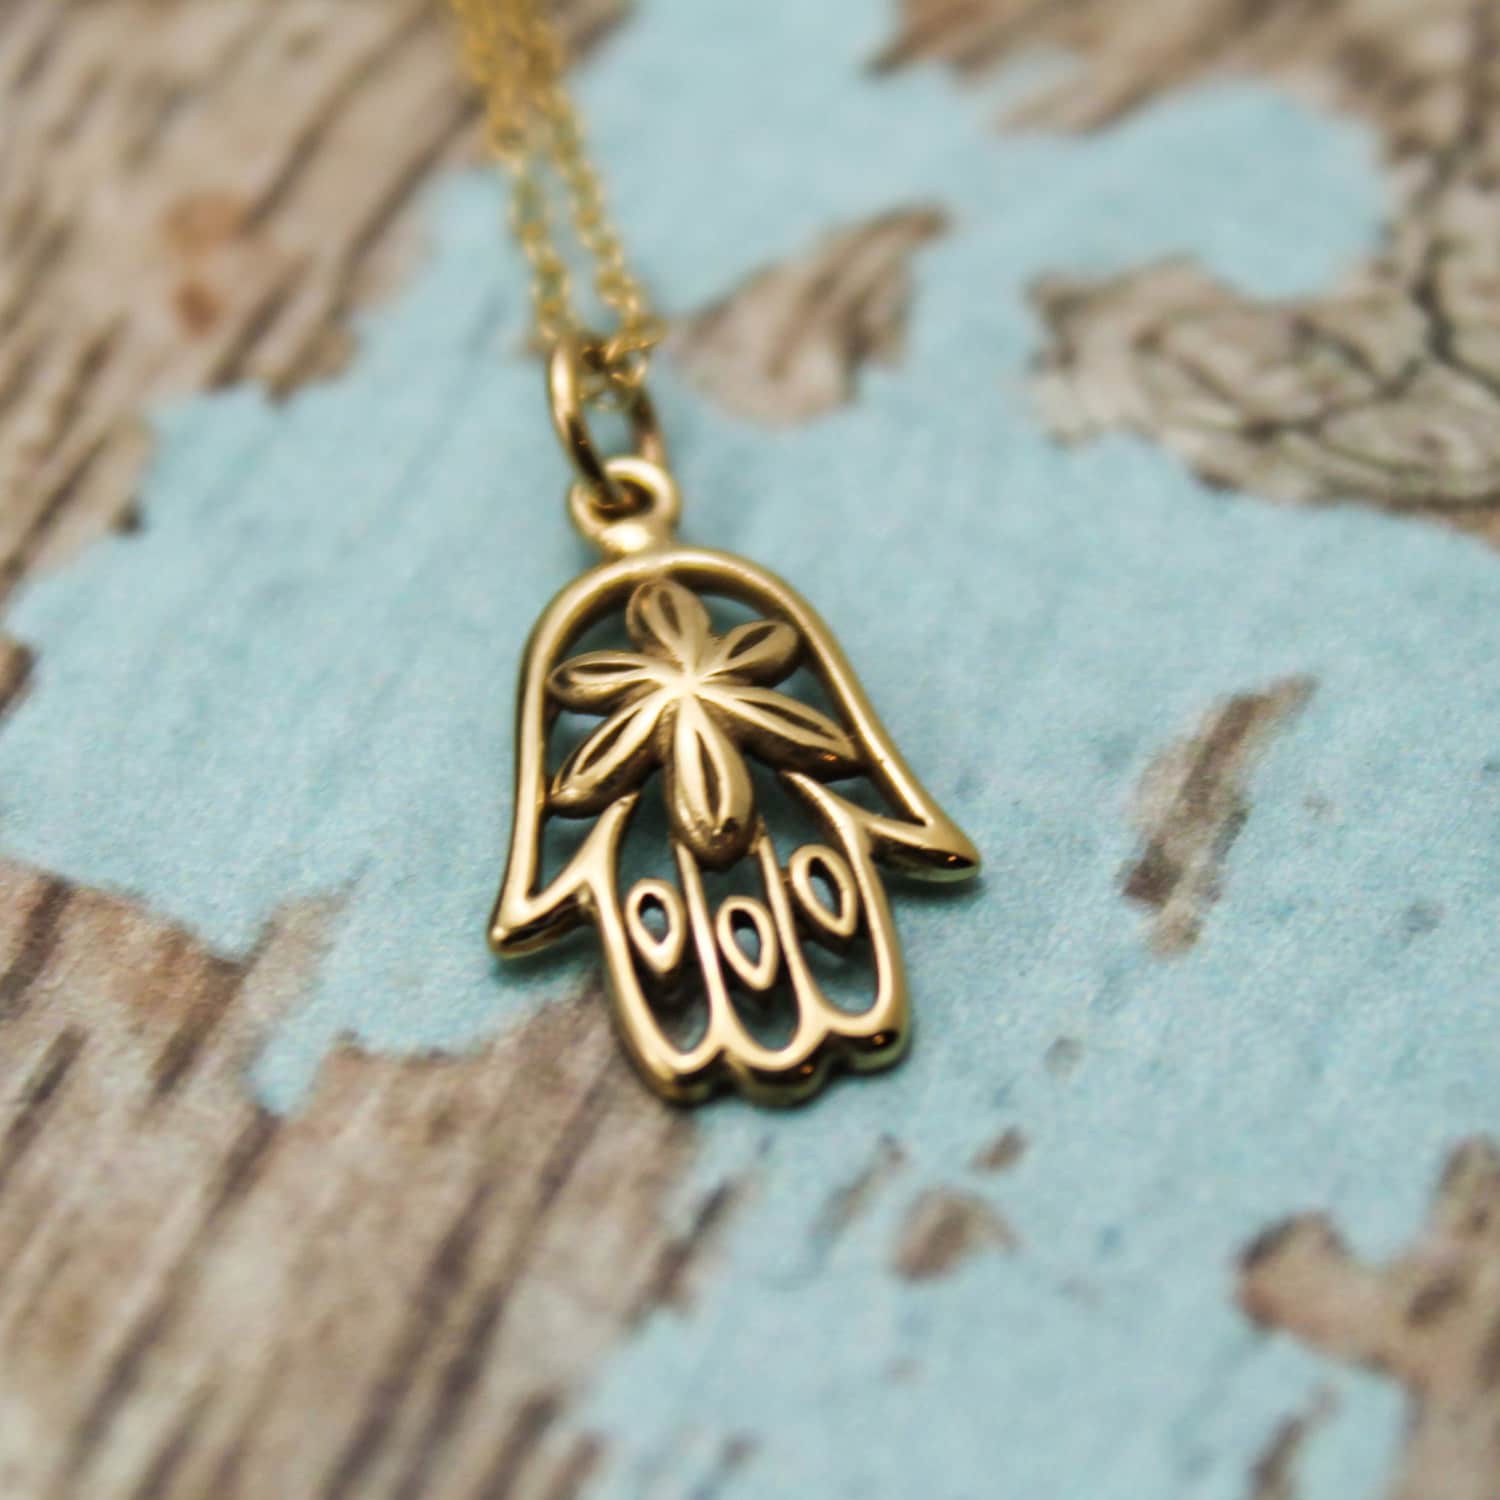 Hamsa Hand Necklace in Bronze and 14K Gold Filled